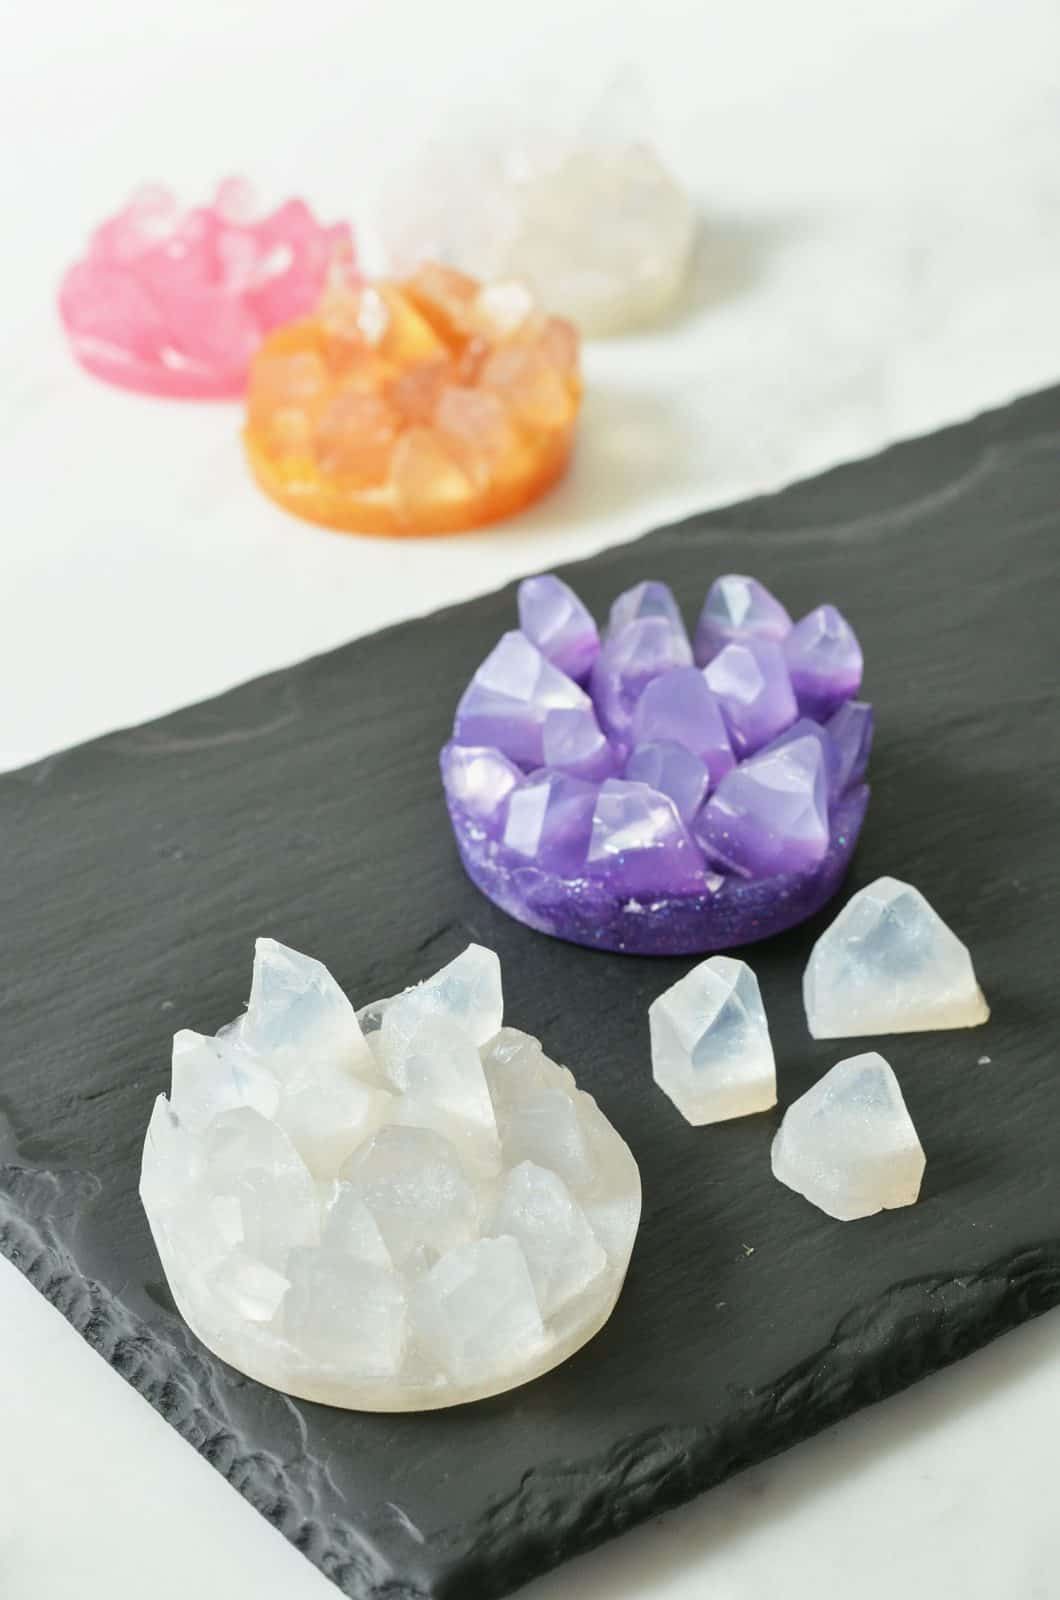 MAKE YOUR OWN CRYSTAL SOAPS